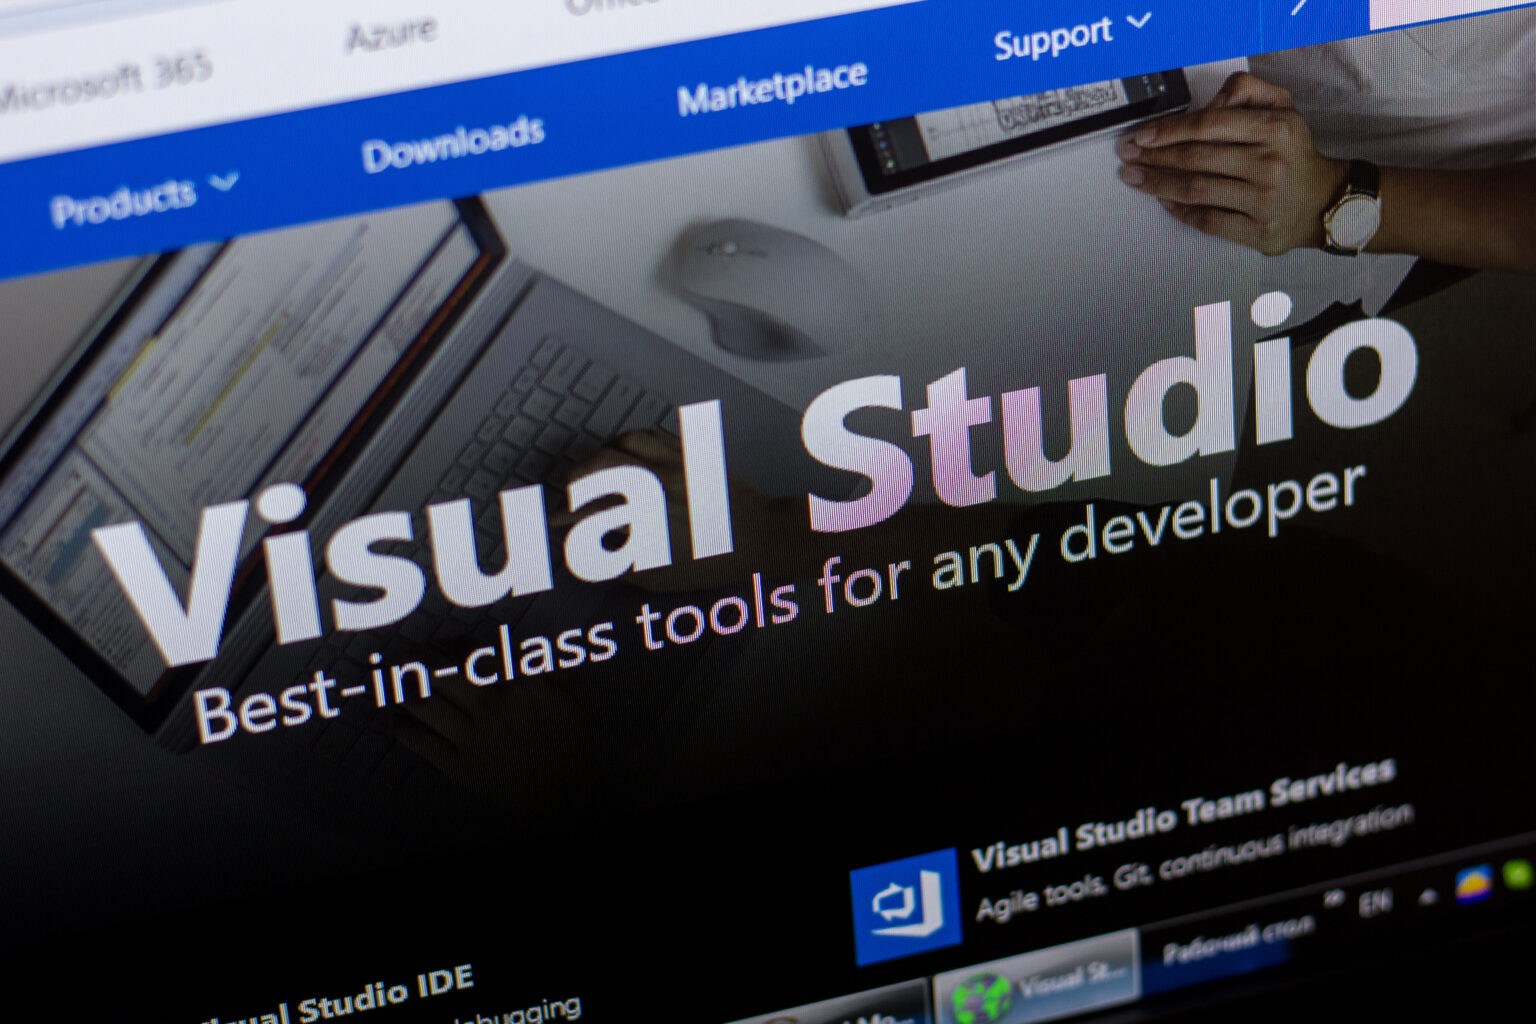 This is the homepage of VisualStudio website on the display of PC, reference of the Visual Studio IDE software